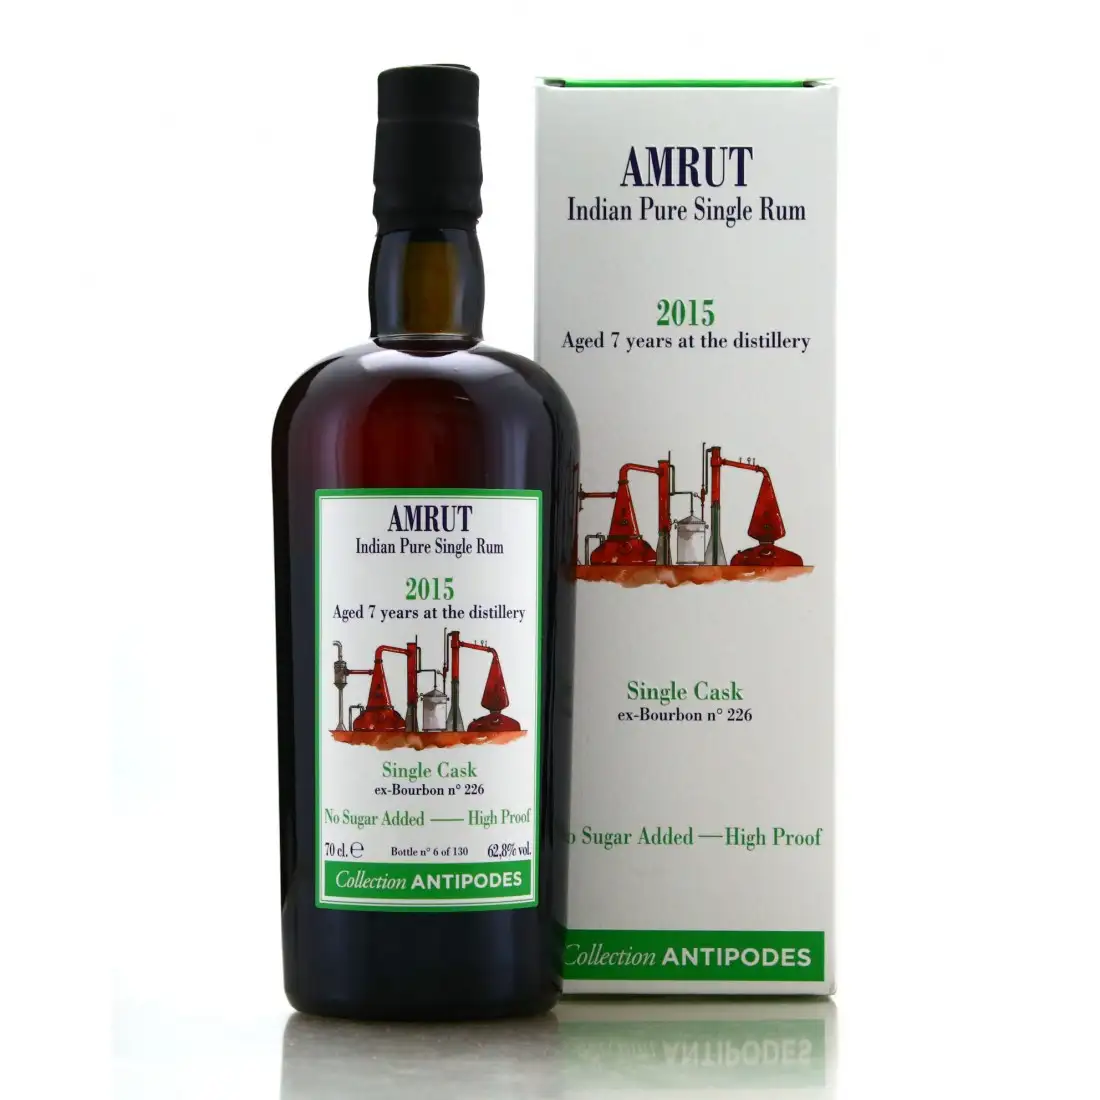 Image of the front of the bottle of the rum Indian Pure Single Rum (Collection Antipodes)